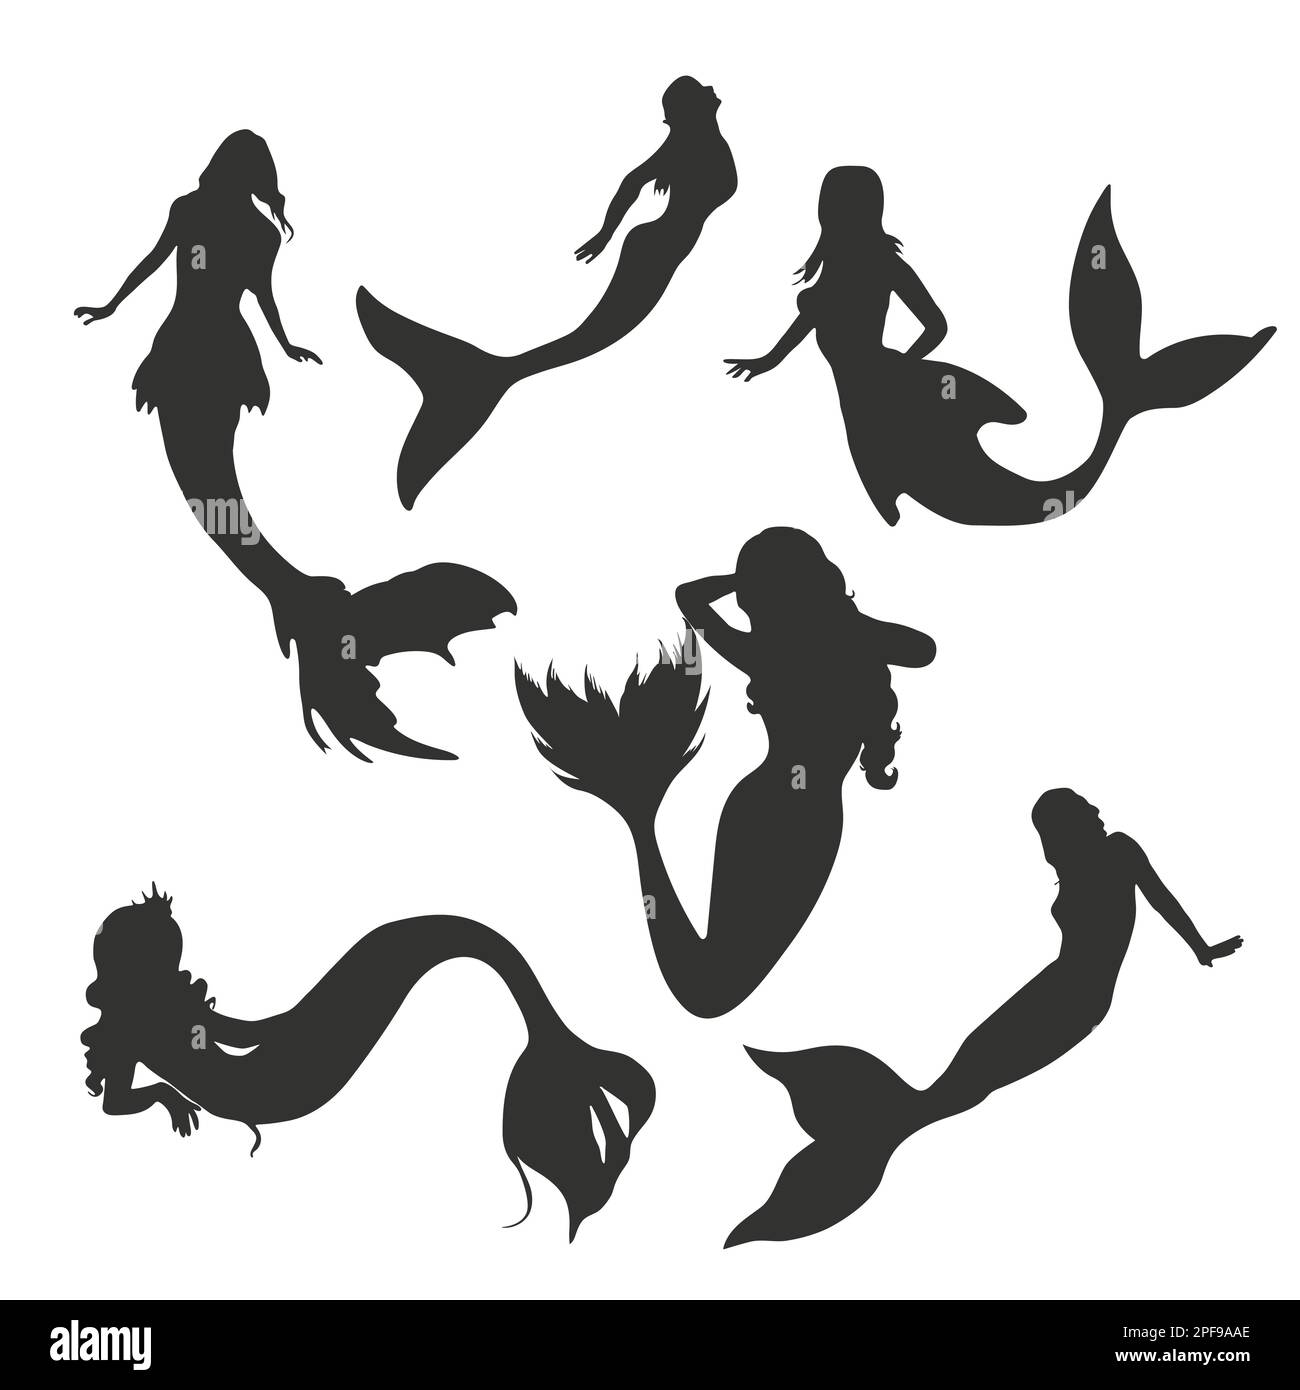 Mermaid silhouette collection Stock Vector